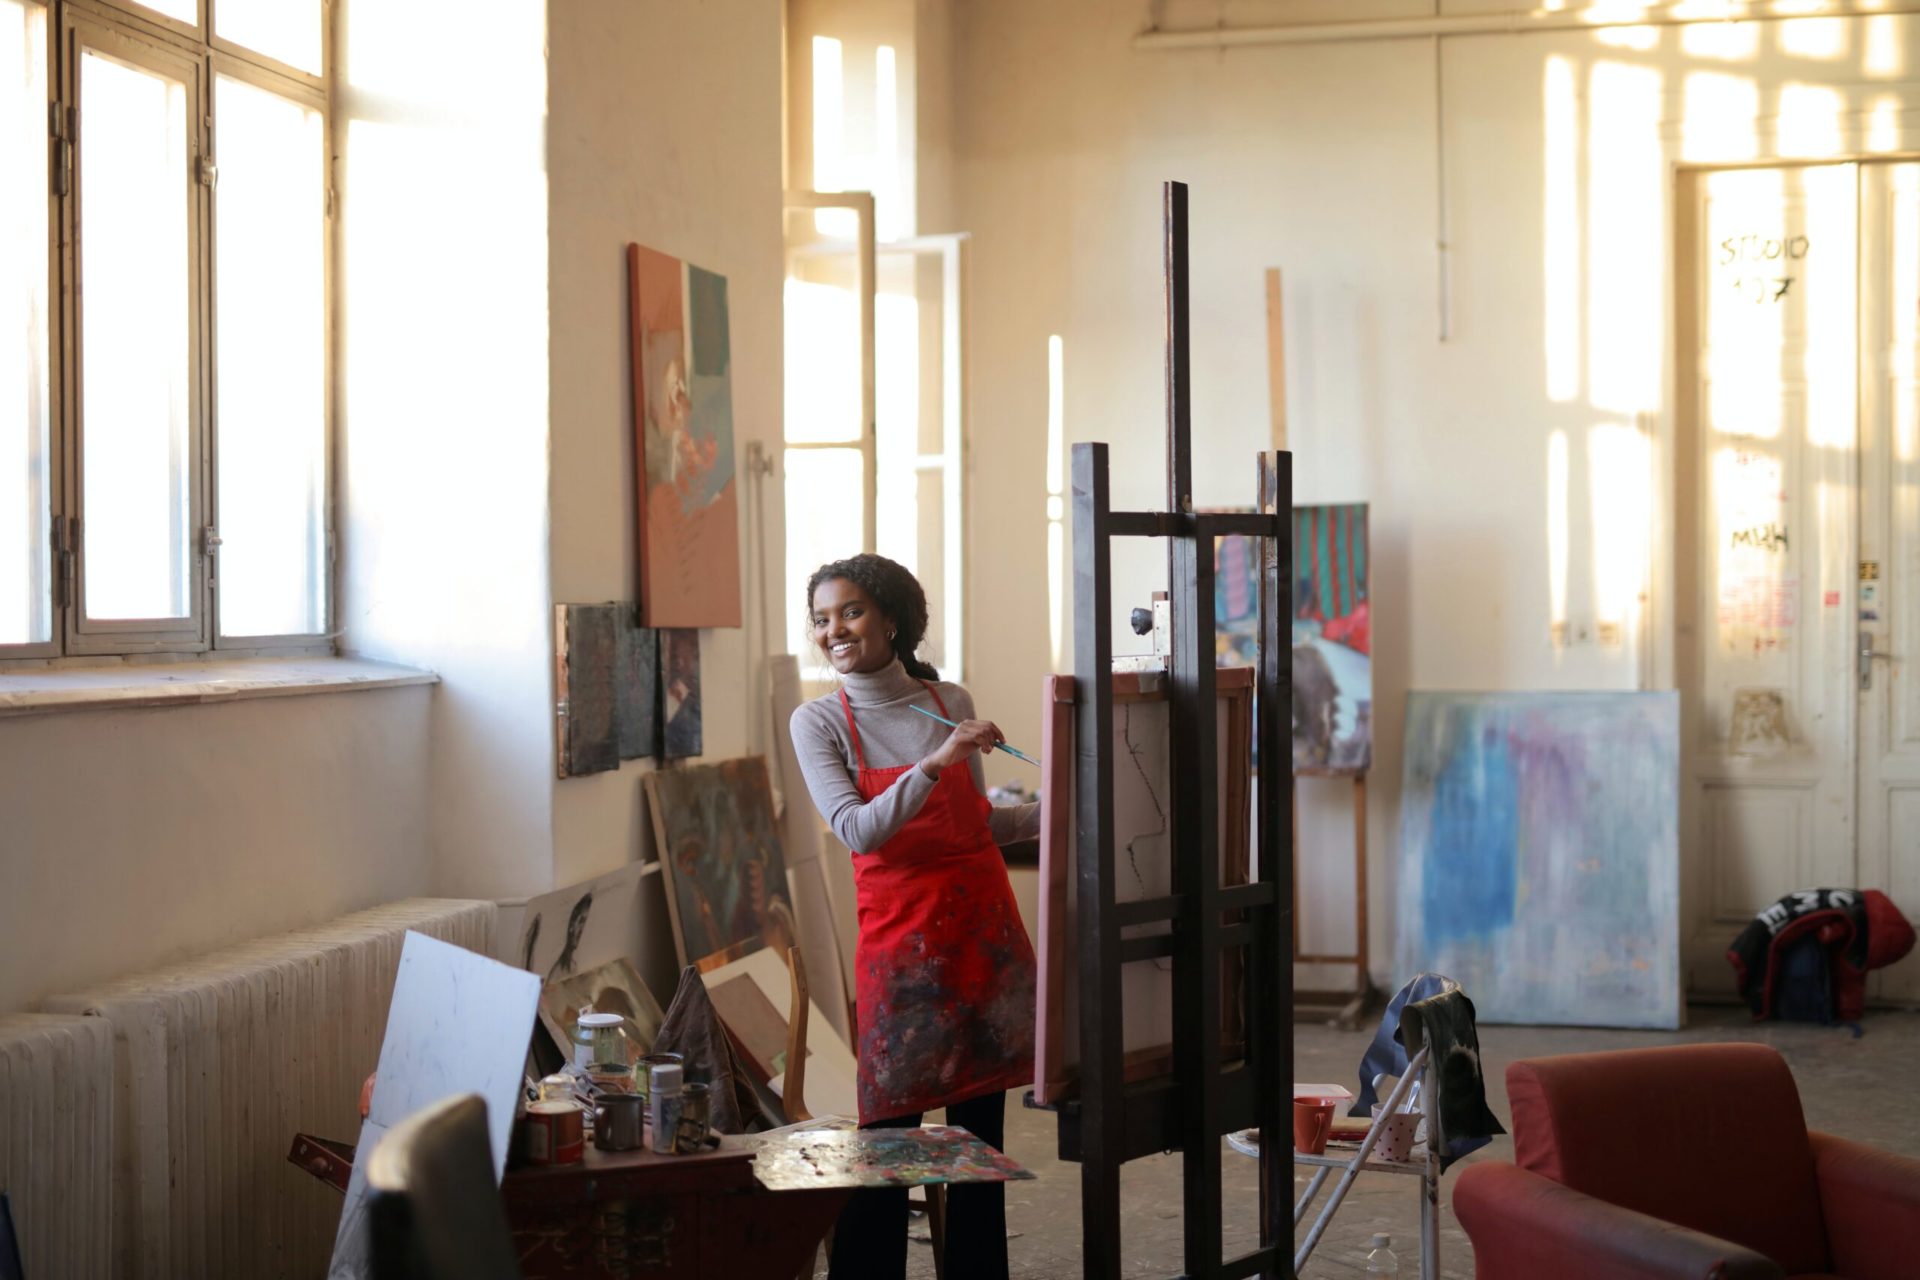 A woman painting in a studio